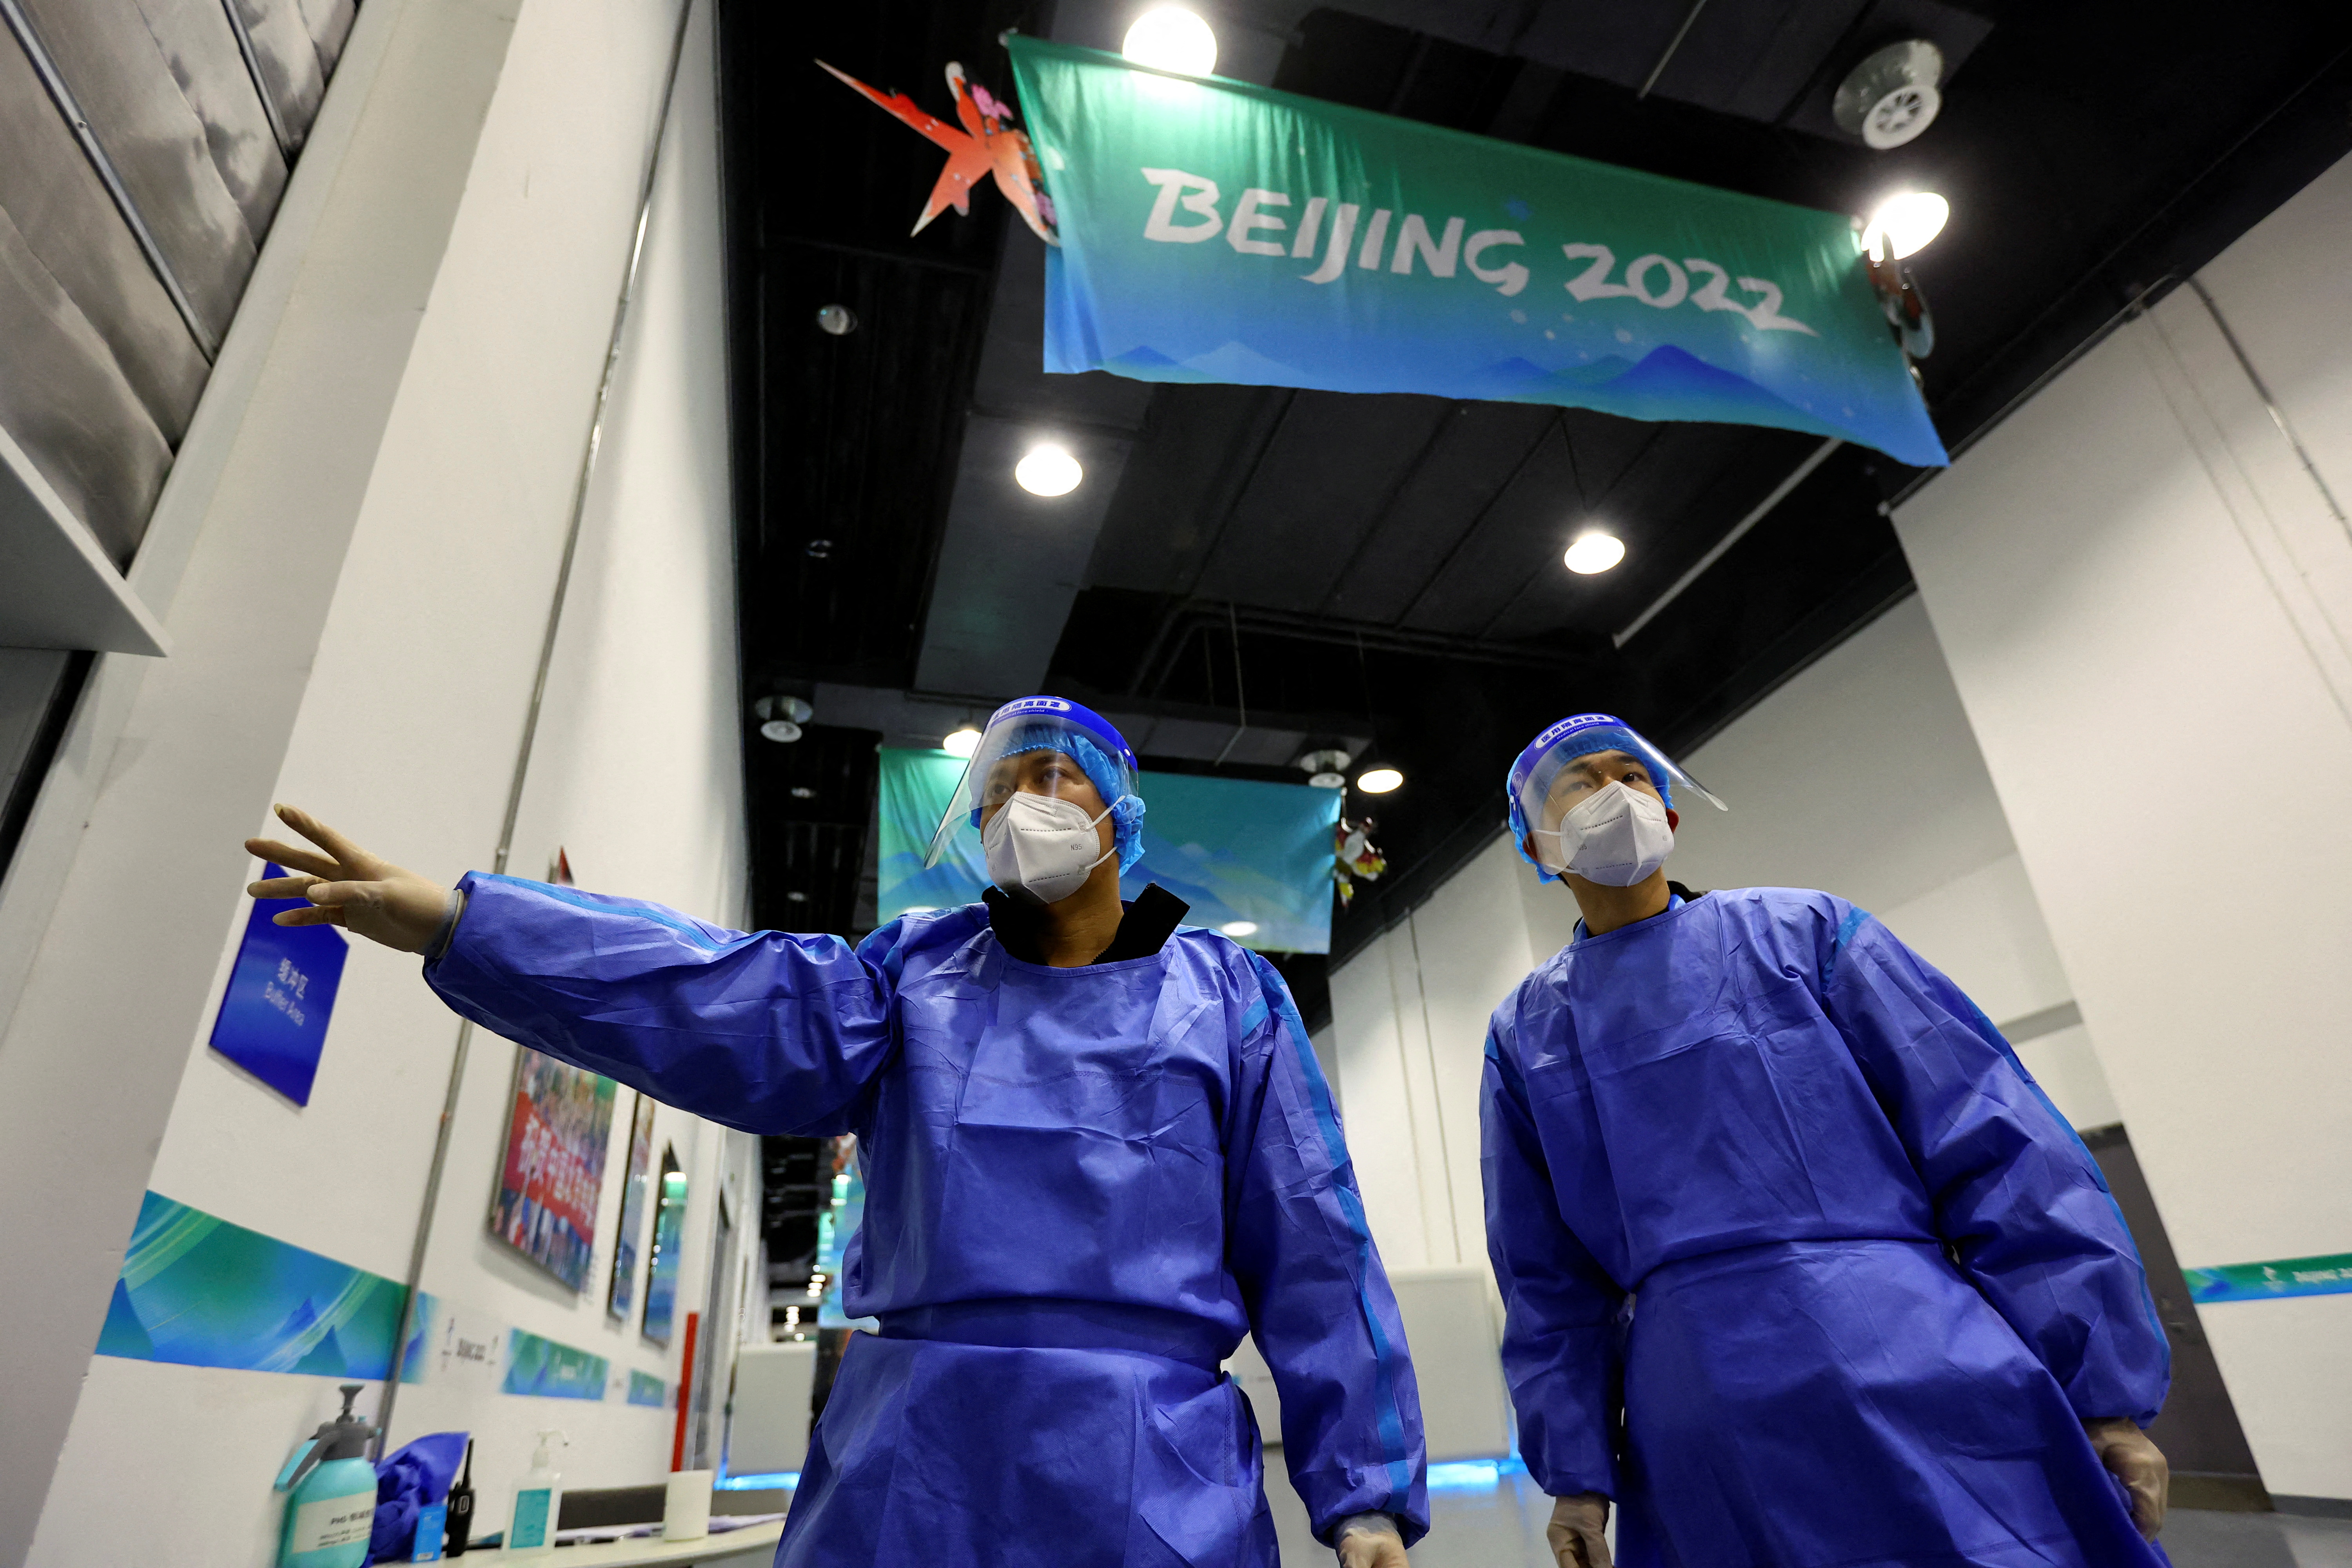 Members of a disinfection team are seen ahead of the Beijing 2022 Winter Olympics, in Beijing